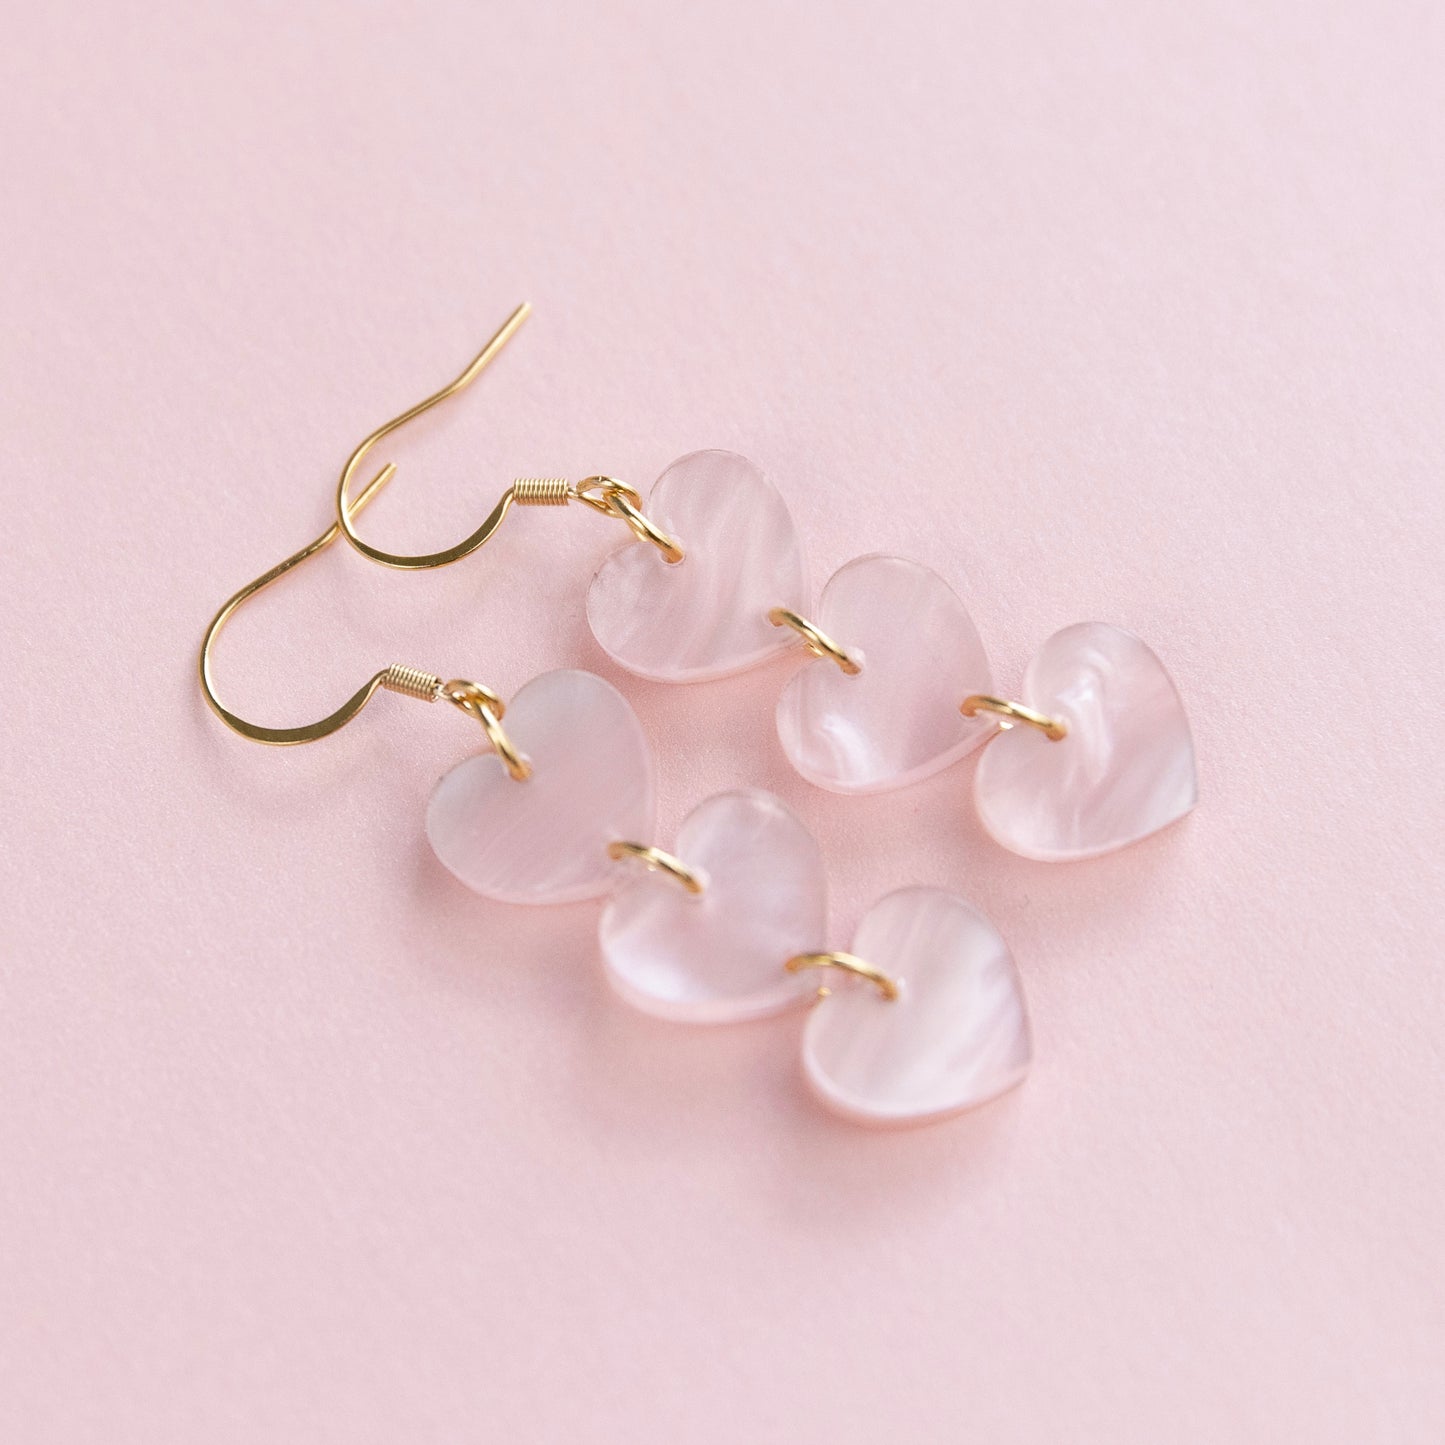 THE HEARTS TRIO in Pink Pearl Shimmer/ Lightweight Acrylic Statement Earrings